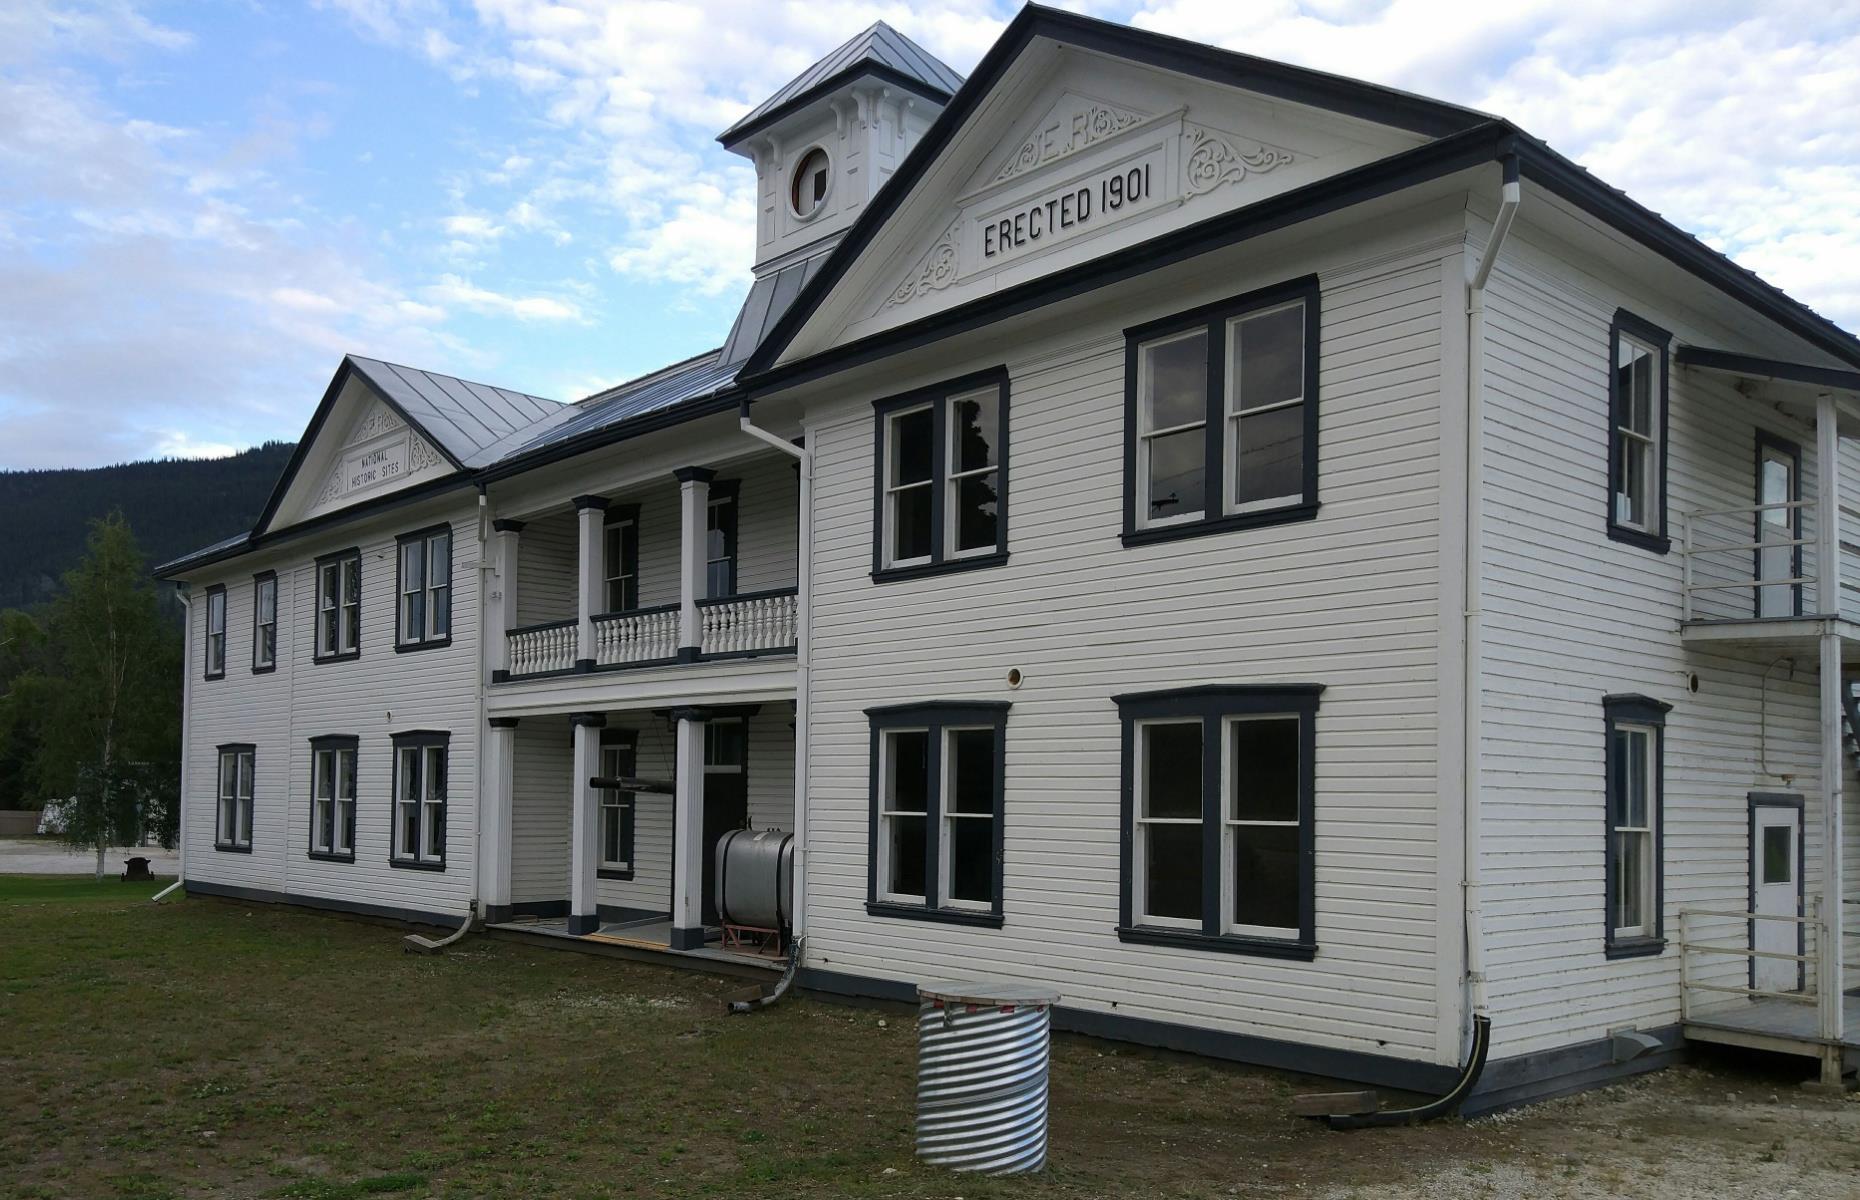 <p>Whitehorse is by far the best-known city in Yukon Territory, but Dawson City is also a compelling place, thanks to its connection with the gold rush of the late 1800s. The best place to dig into that history is at <a href="http://dawsonmuseum.ca">this local museum</a>, located in a restored venue that was once the city's main administrative building. The museum is packed with authentic archival material detailing the history of the city and the rugged folks that tried to make their fortune in the wild northwest.</p>  <p><strong><a href="https://www.loveexploring.com/galleries/150706/where-ontario-gets-its-name-from-and-more-interesting-canada-facts?page=1">Learn more with these fascinating Canada facts</a></strong></p>